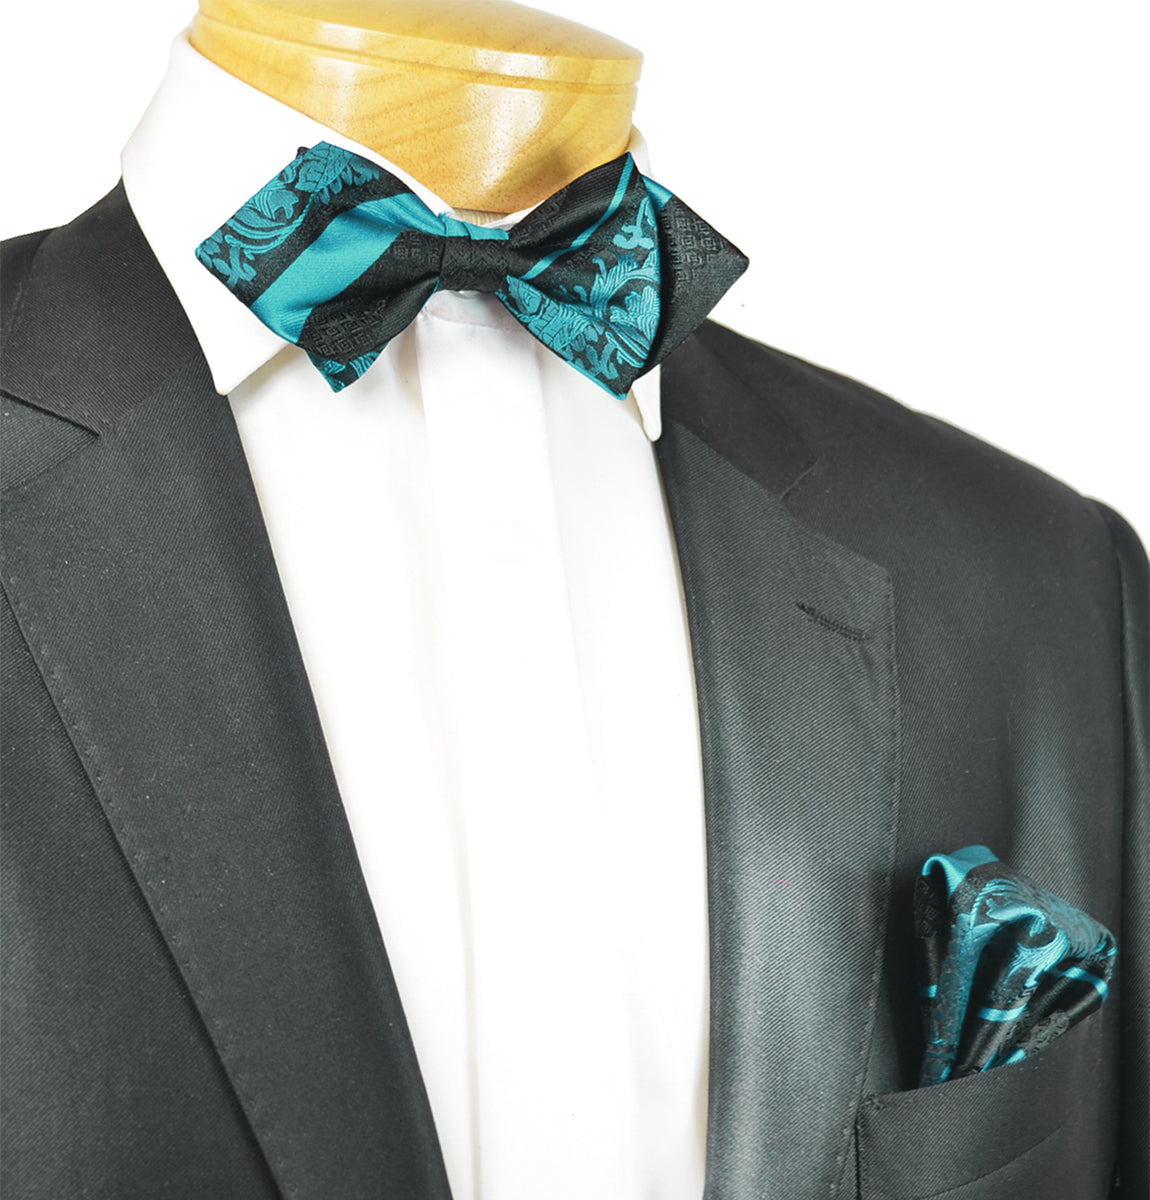 teal bow tie with black suit